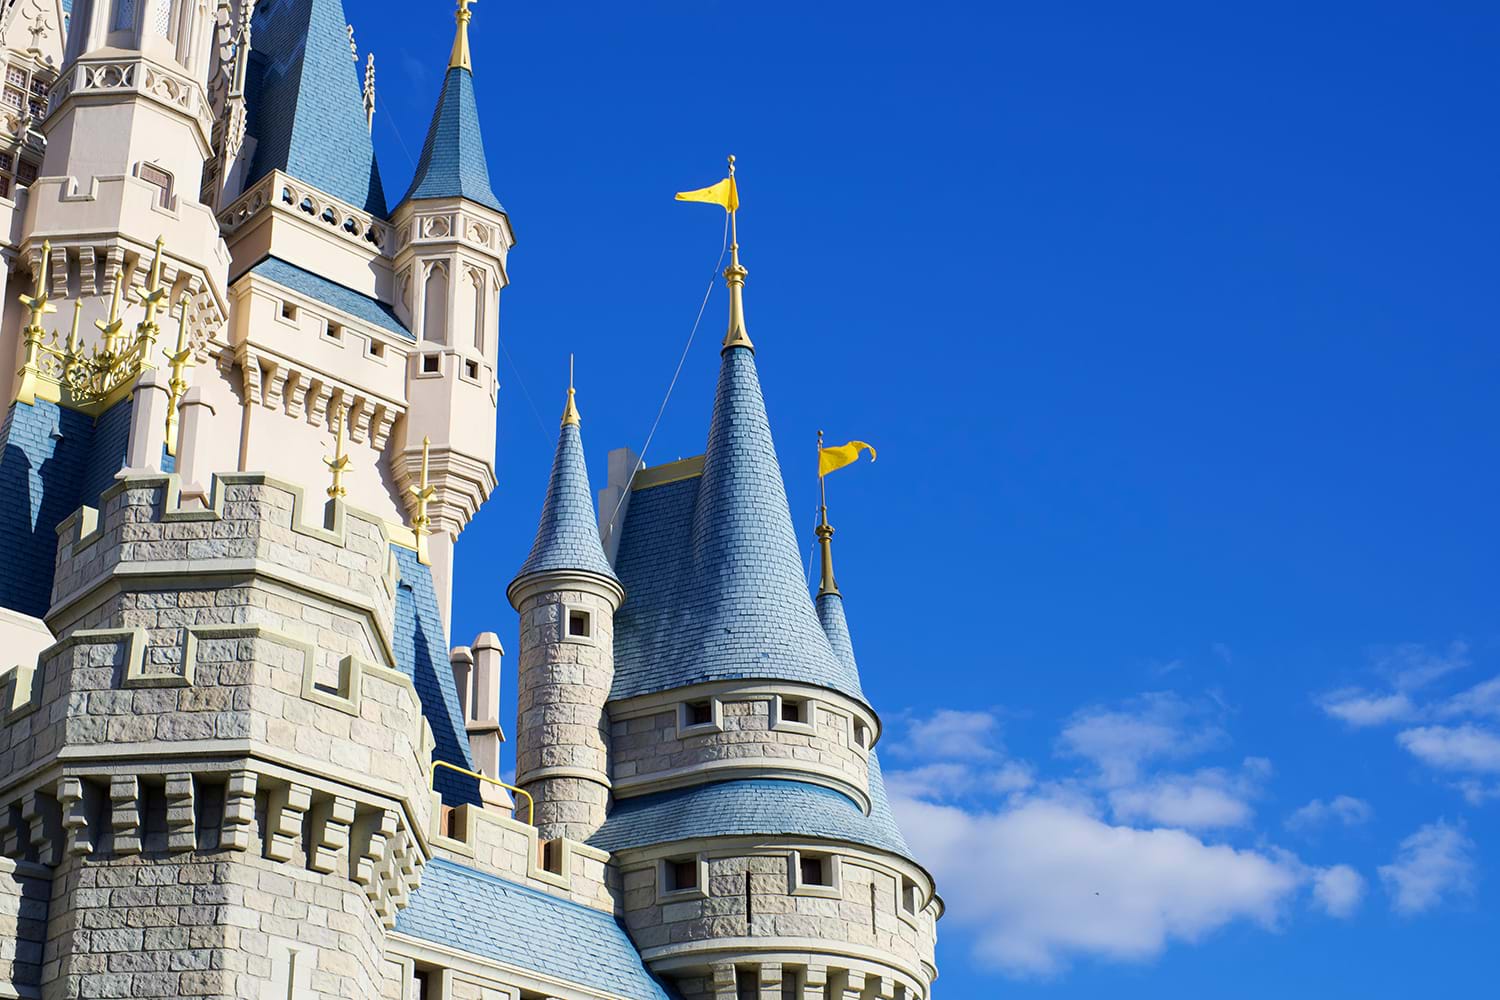 Angled view of Cinderella's castle 